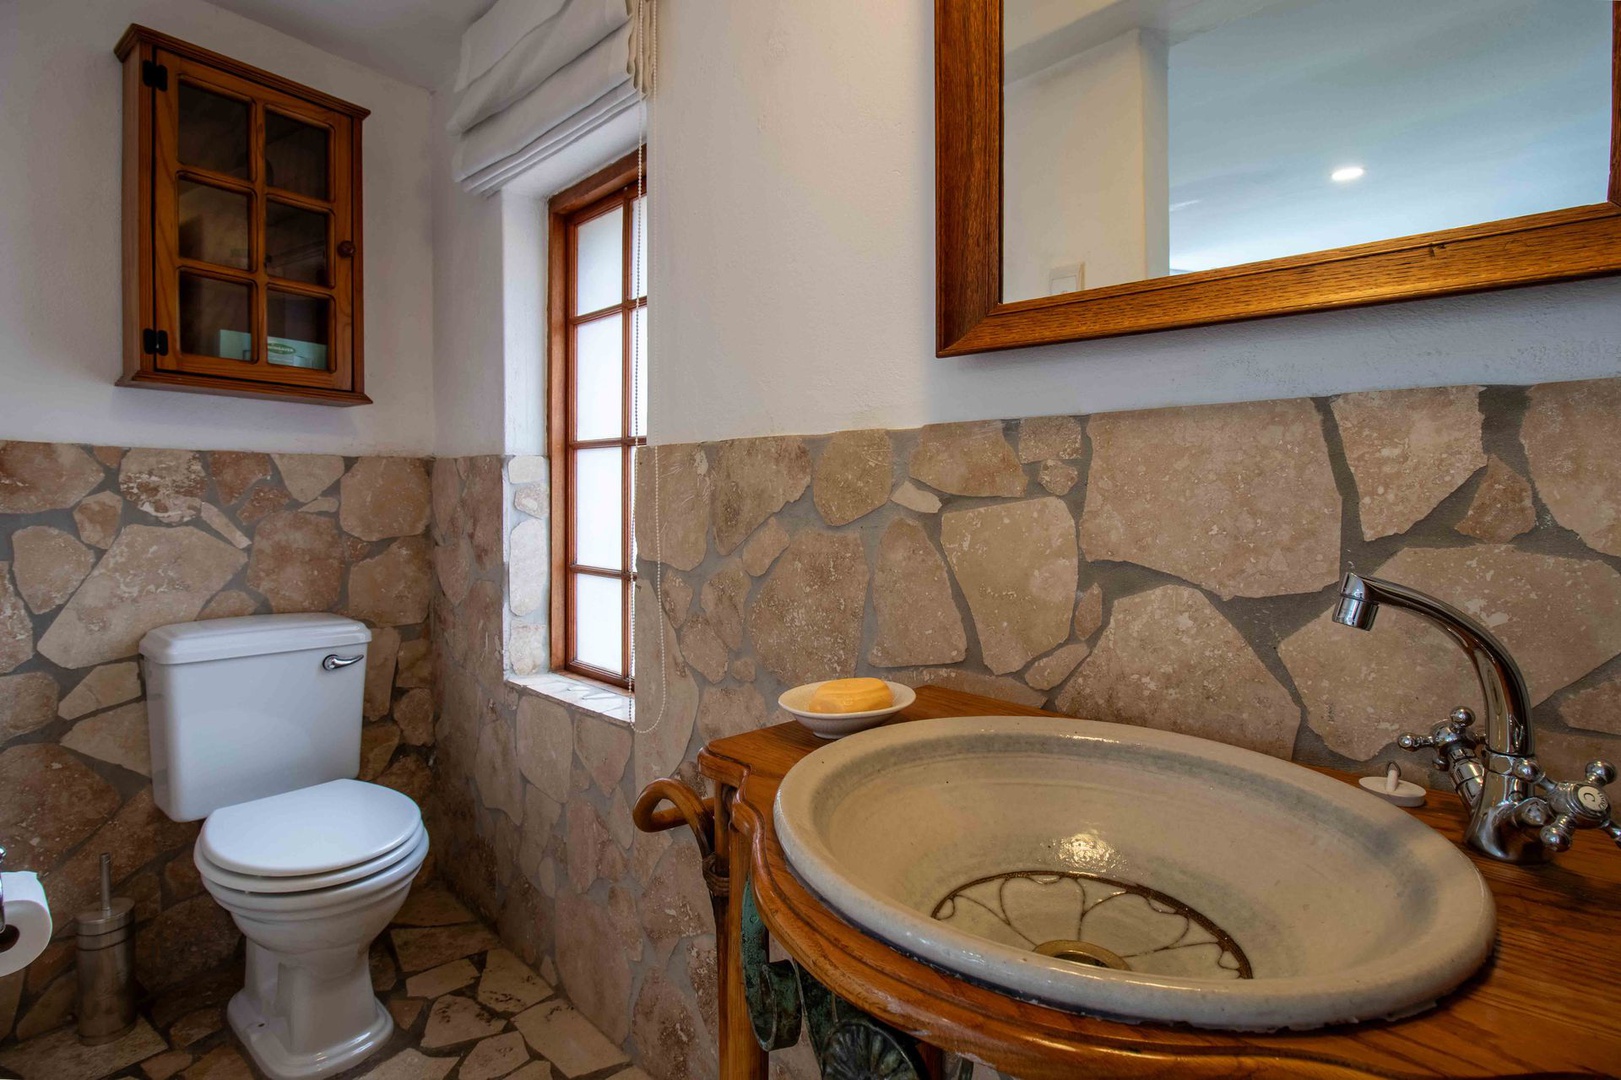 House in Kosmos - * Flat at pool level has its own en-suite bathroom with shower